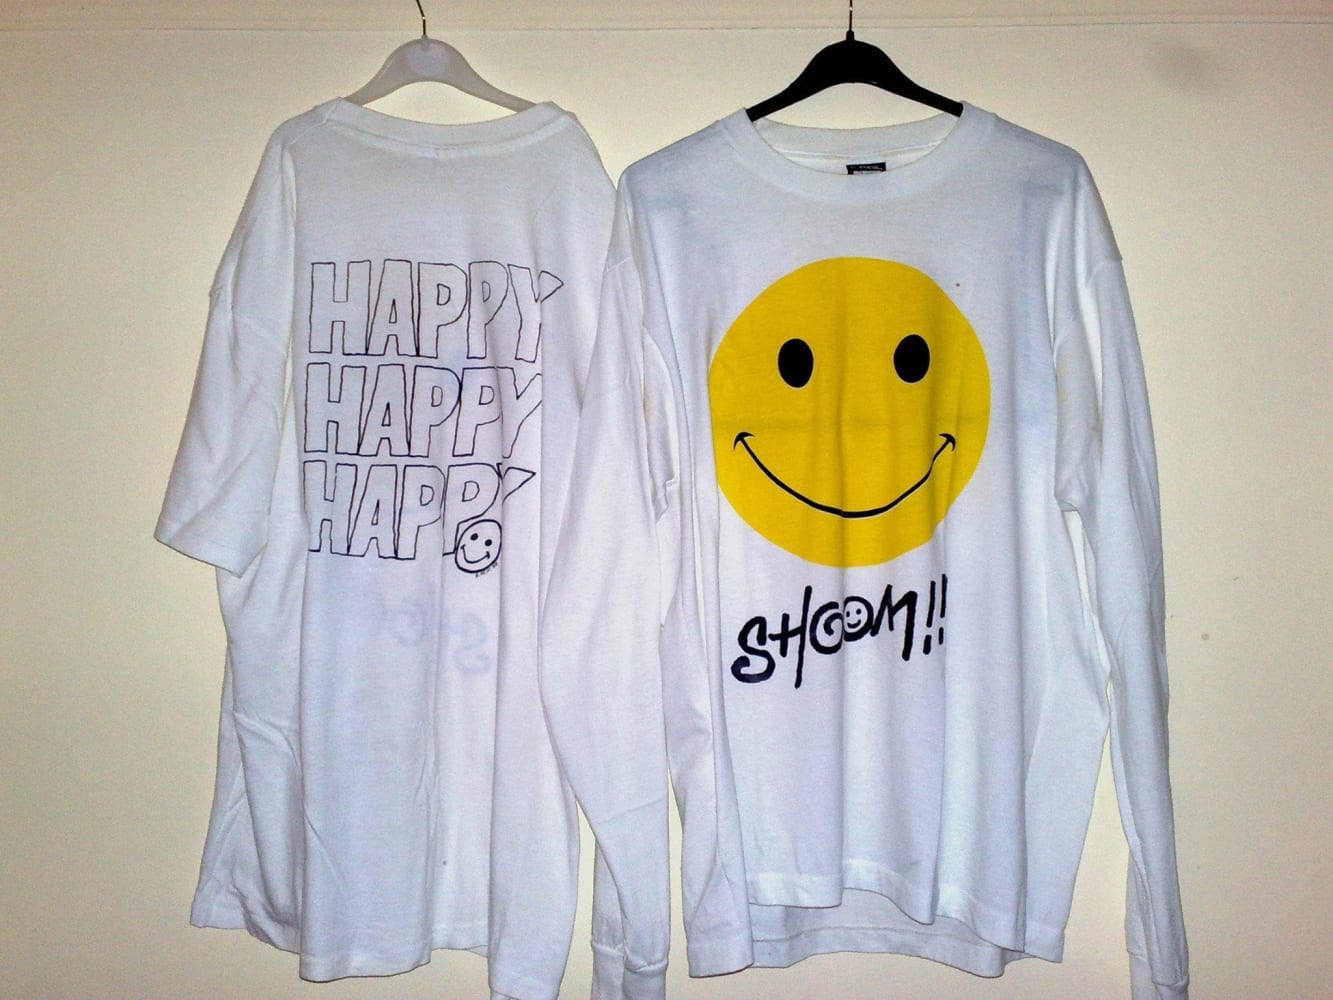 Acid house smiley: The history of the rave symbol